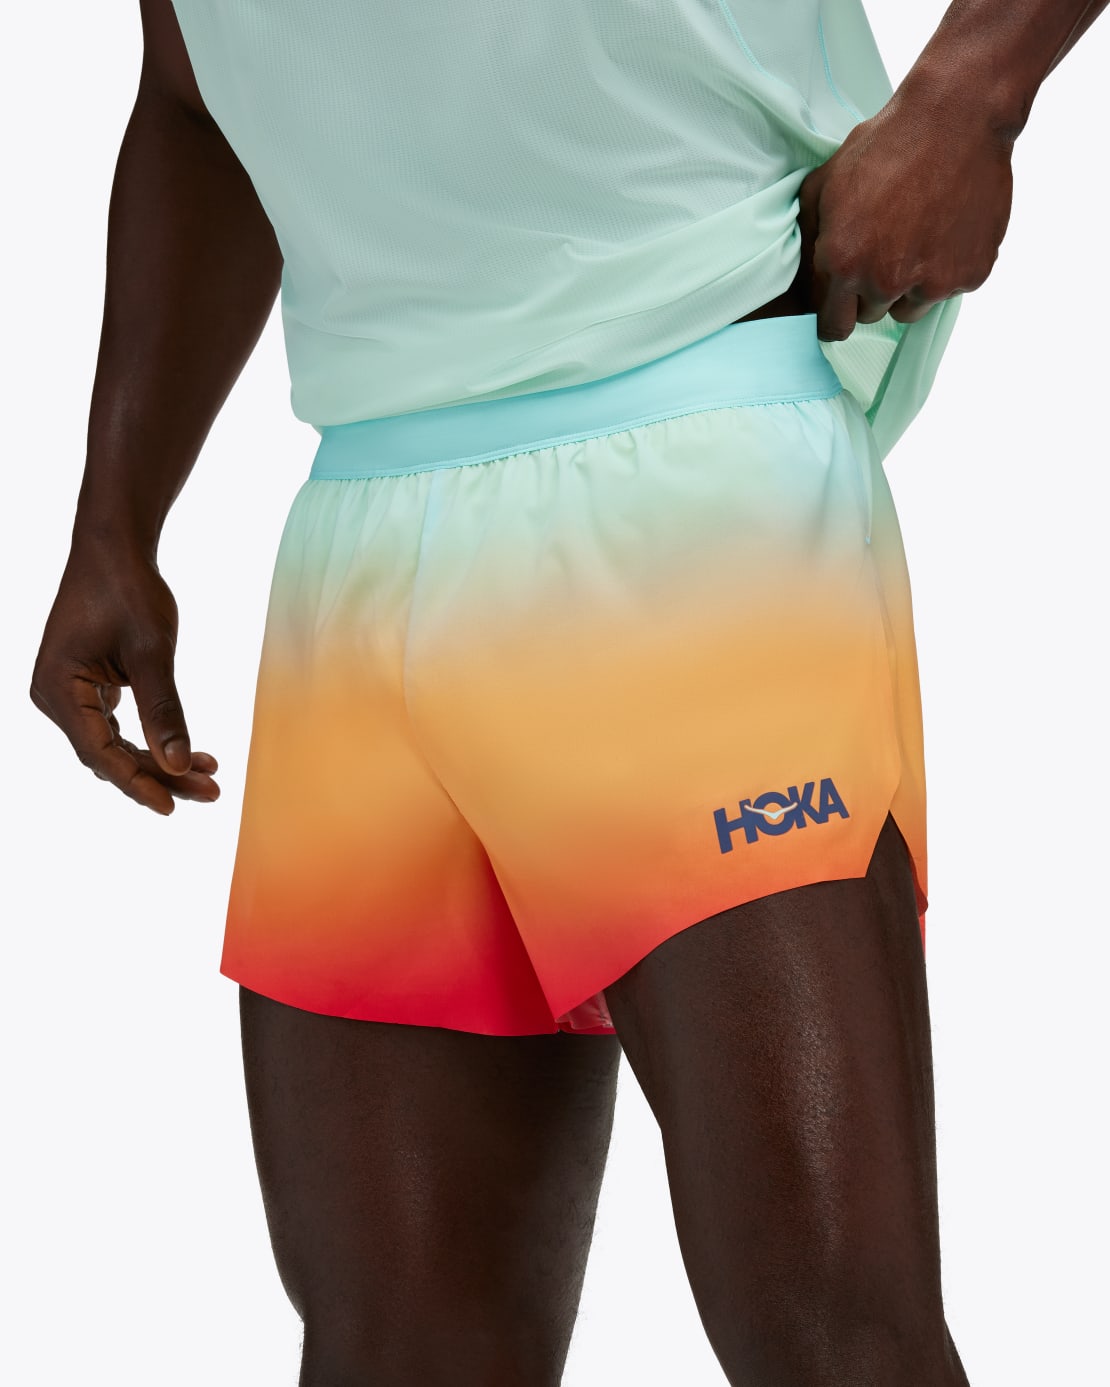 Running Shorts With a Phone Pocket: Why They're So Convenient. Nike CA